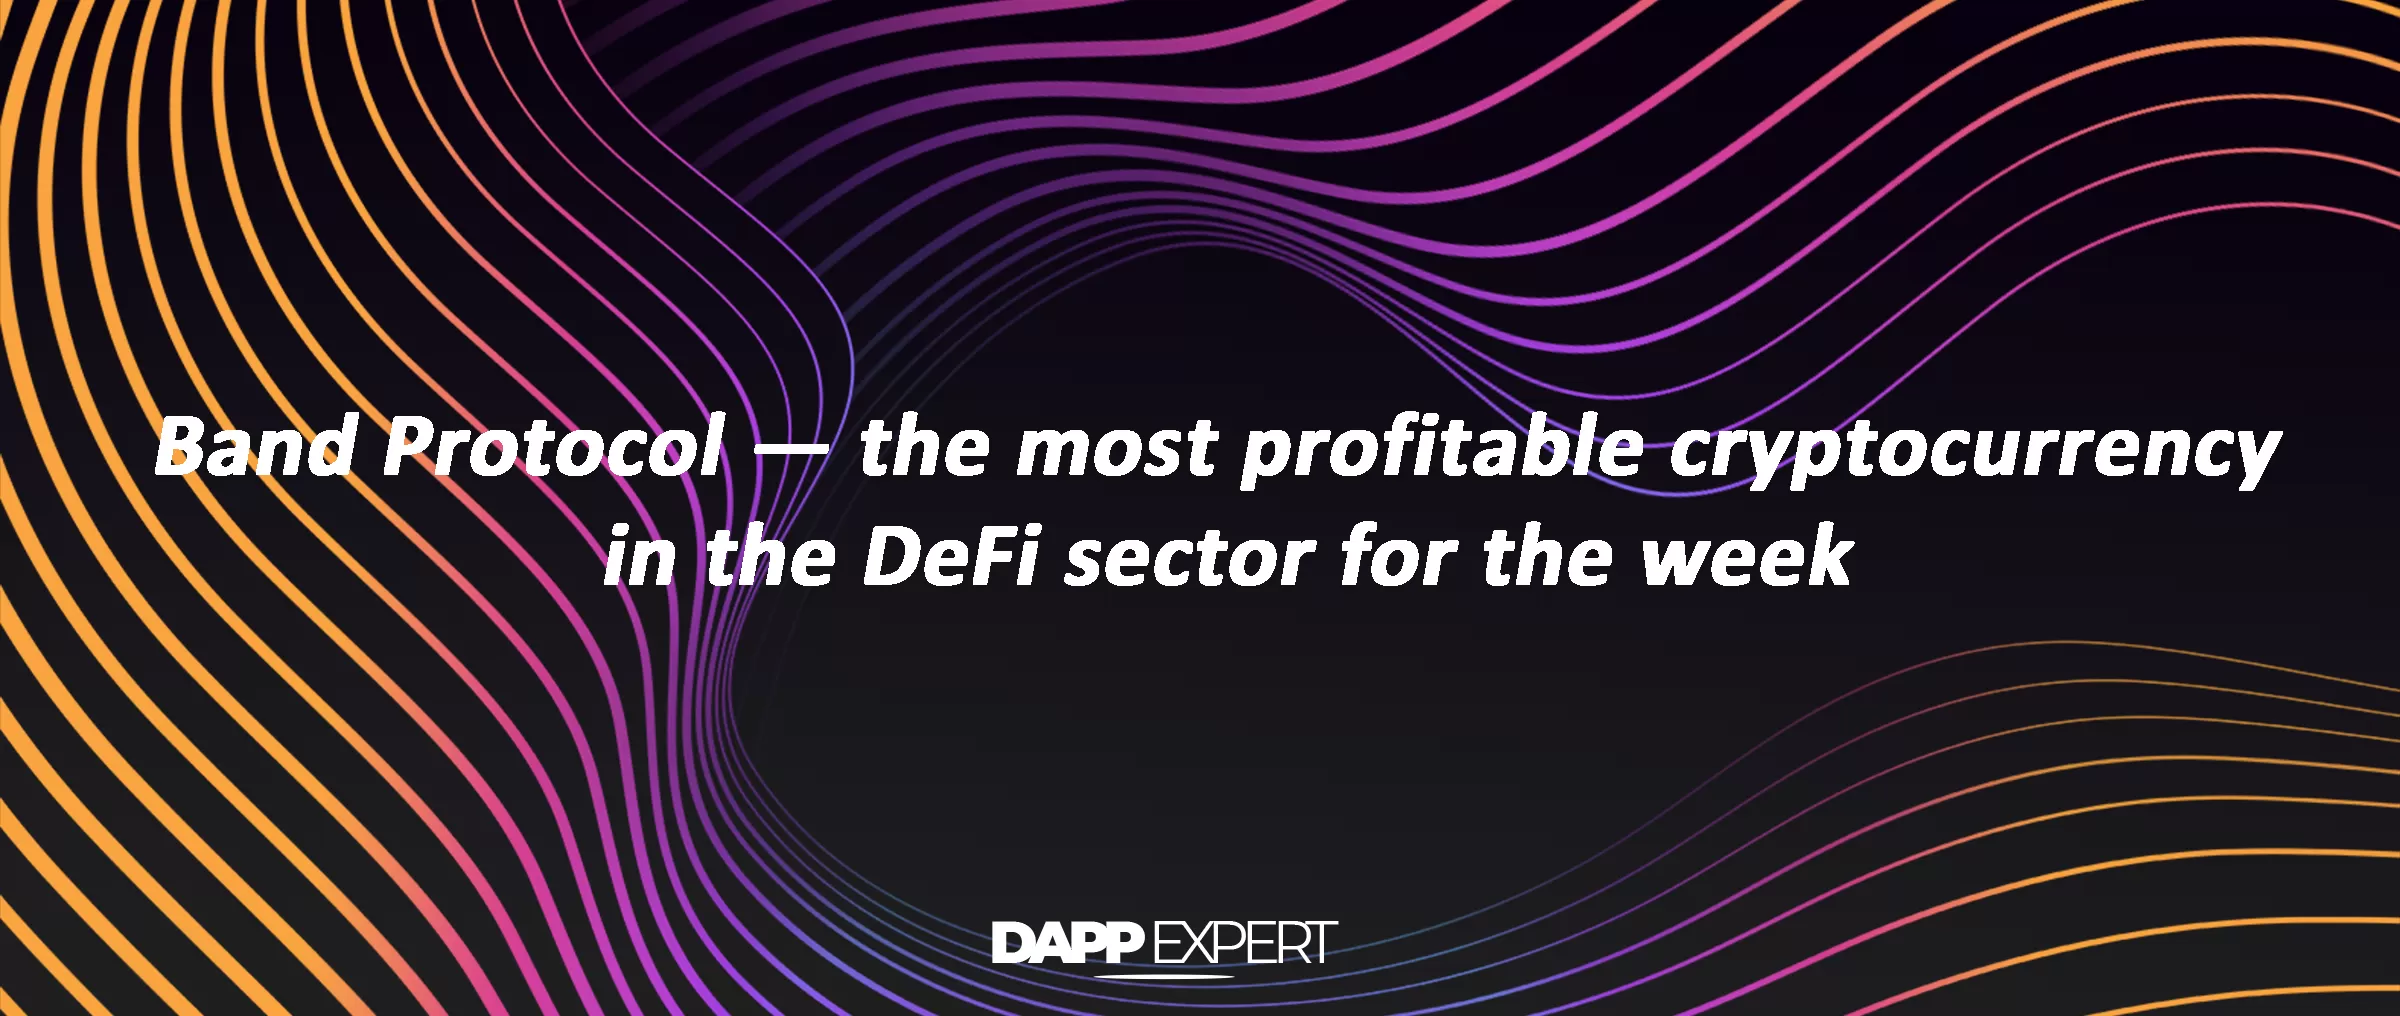 Band Protocol — the most profitable cryptocurrency in the DeFi sector for the week